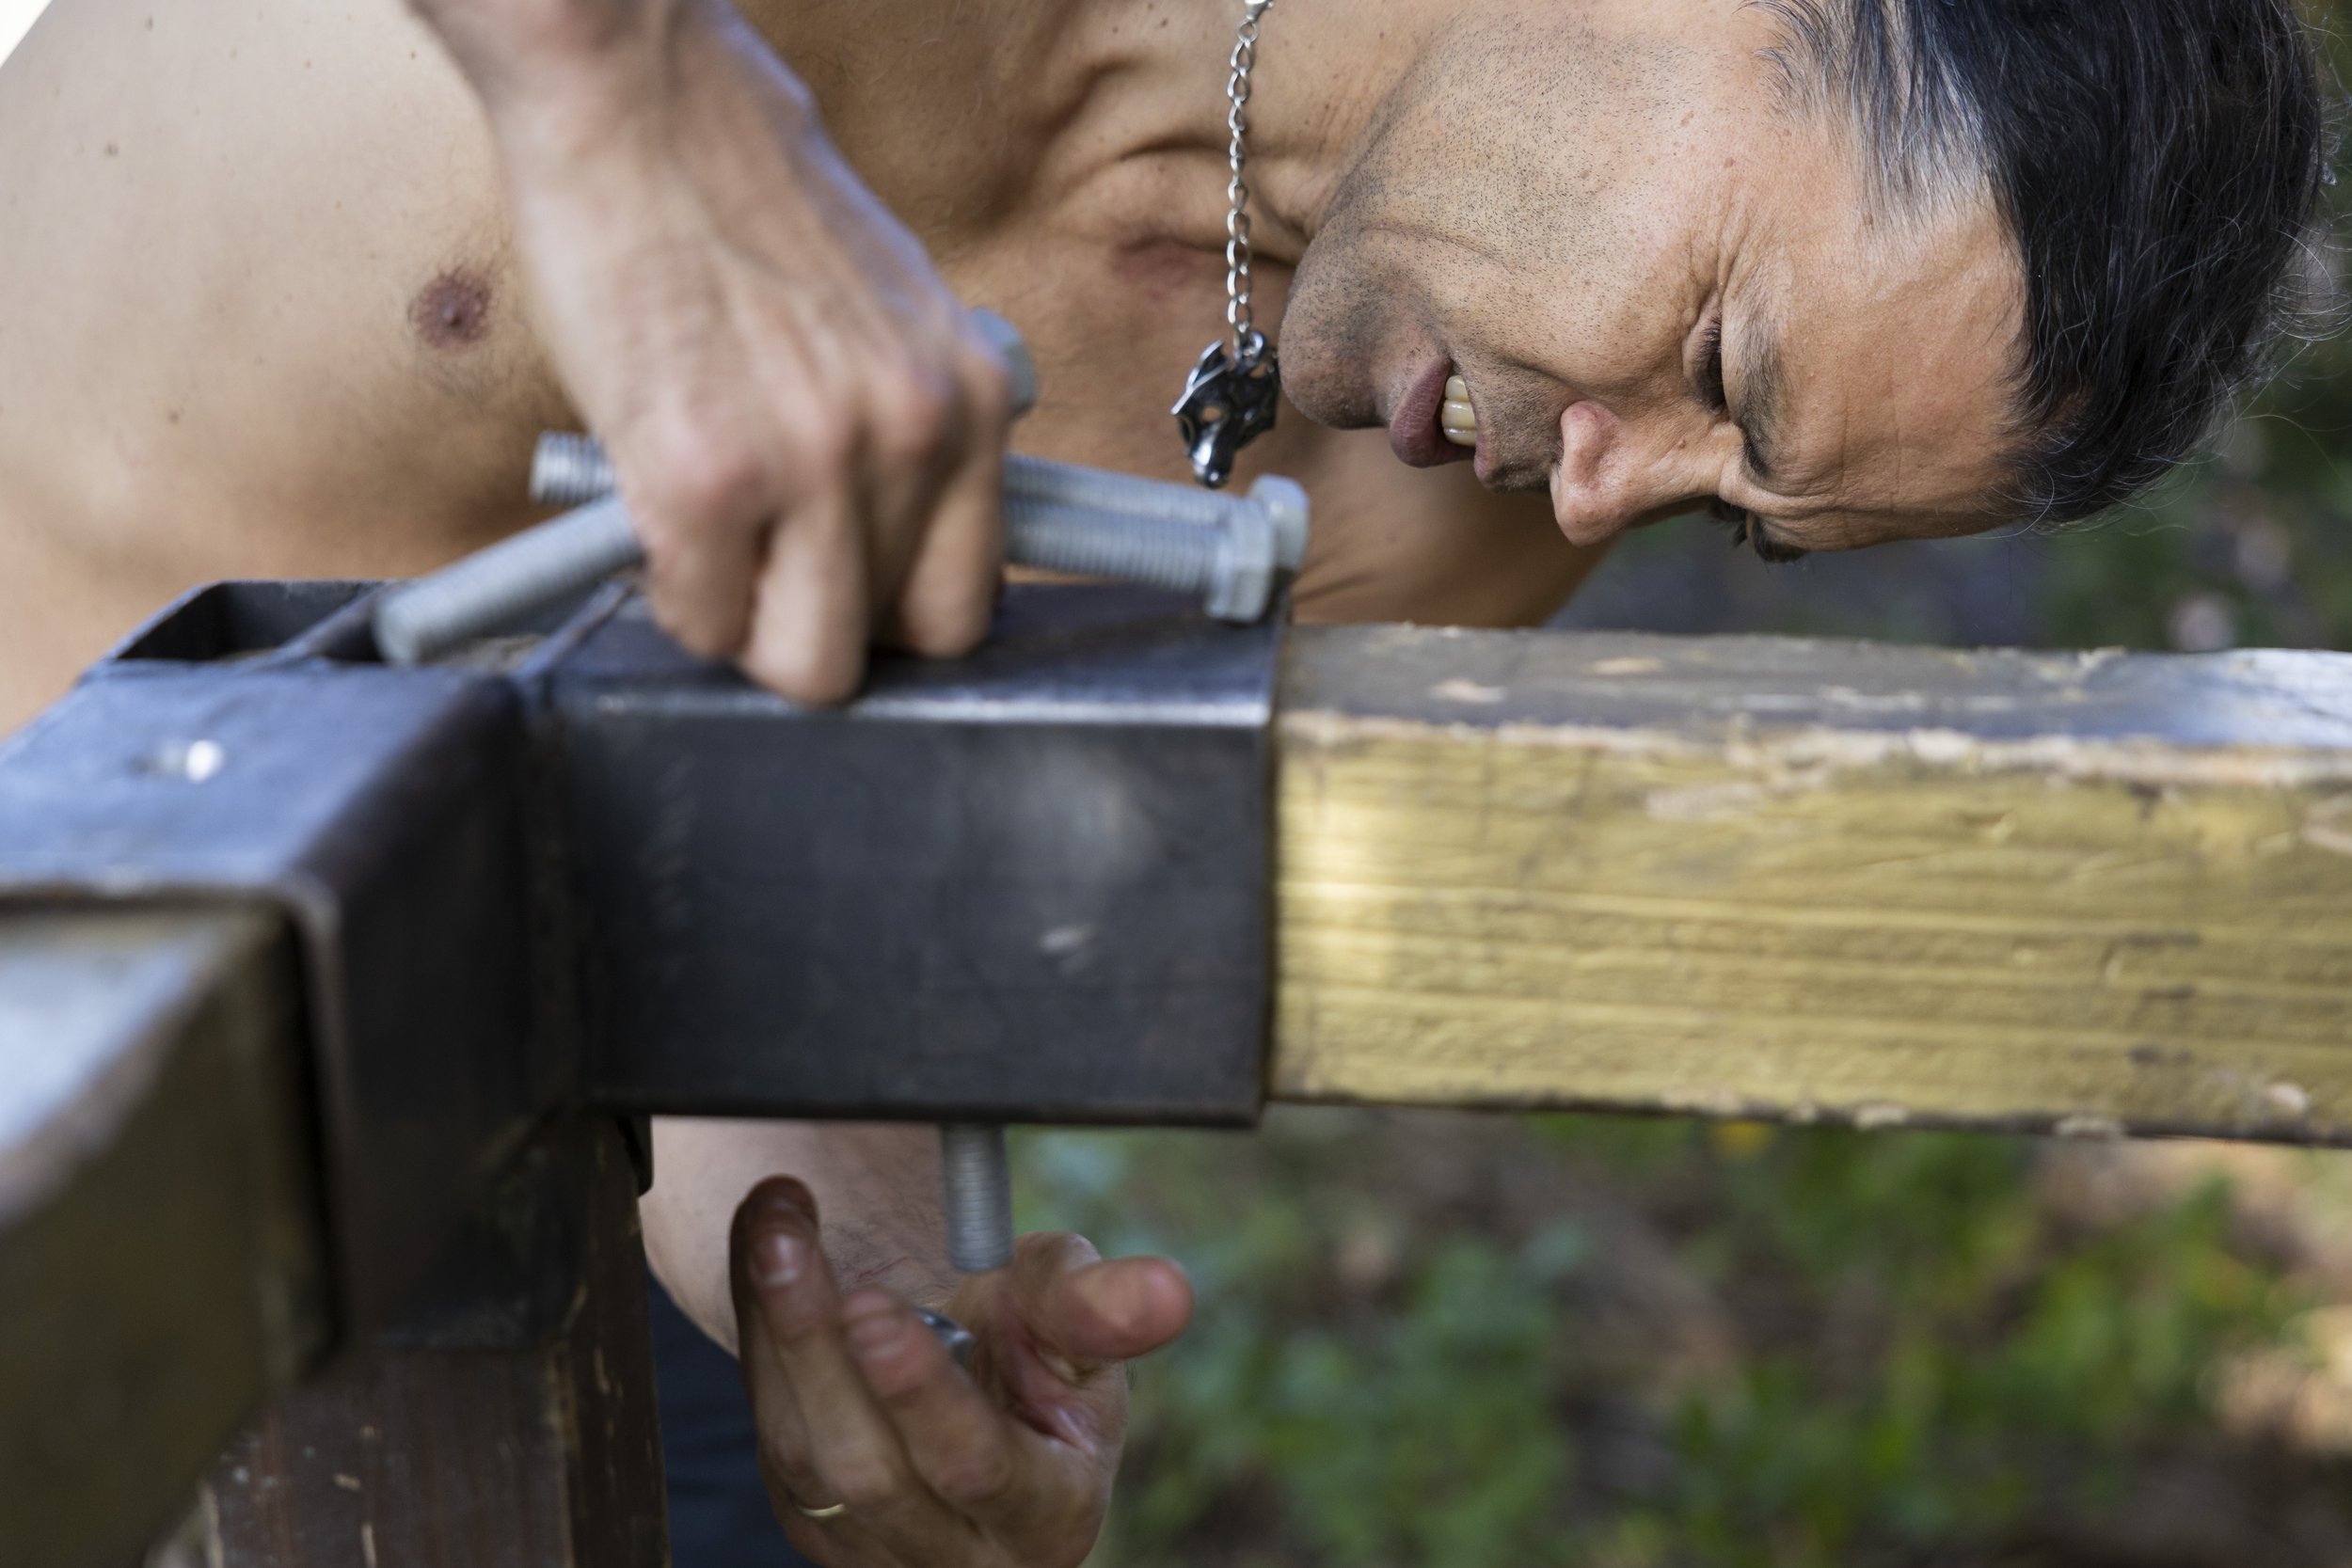  Ronin Sato, a member of the buhurt team Los Angeles Golden Knights, helps to take apart the wooden ring, or list, that held in the fighters during a team practice at Culver City Park, in Culver City, Calif., on Saturday, Dec. 9, 2023. Buhurt, otherw